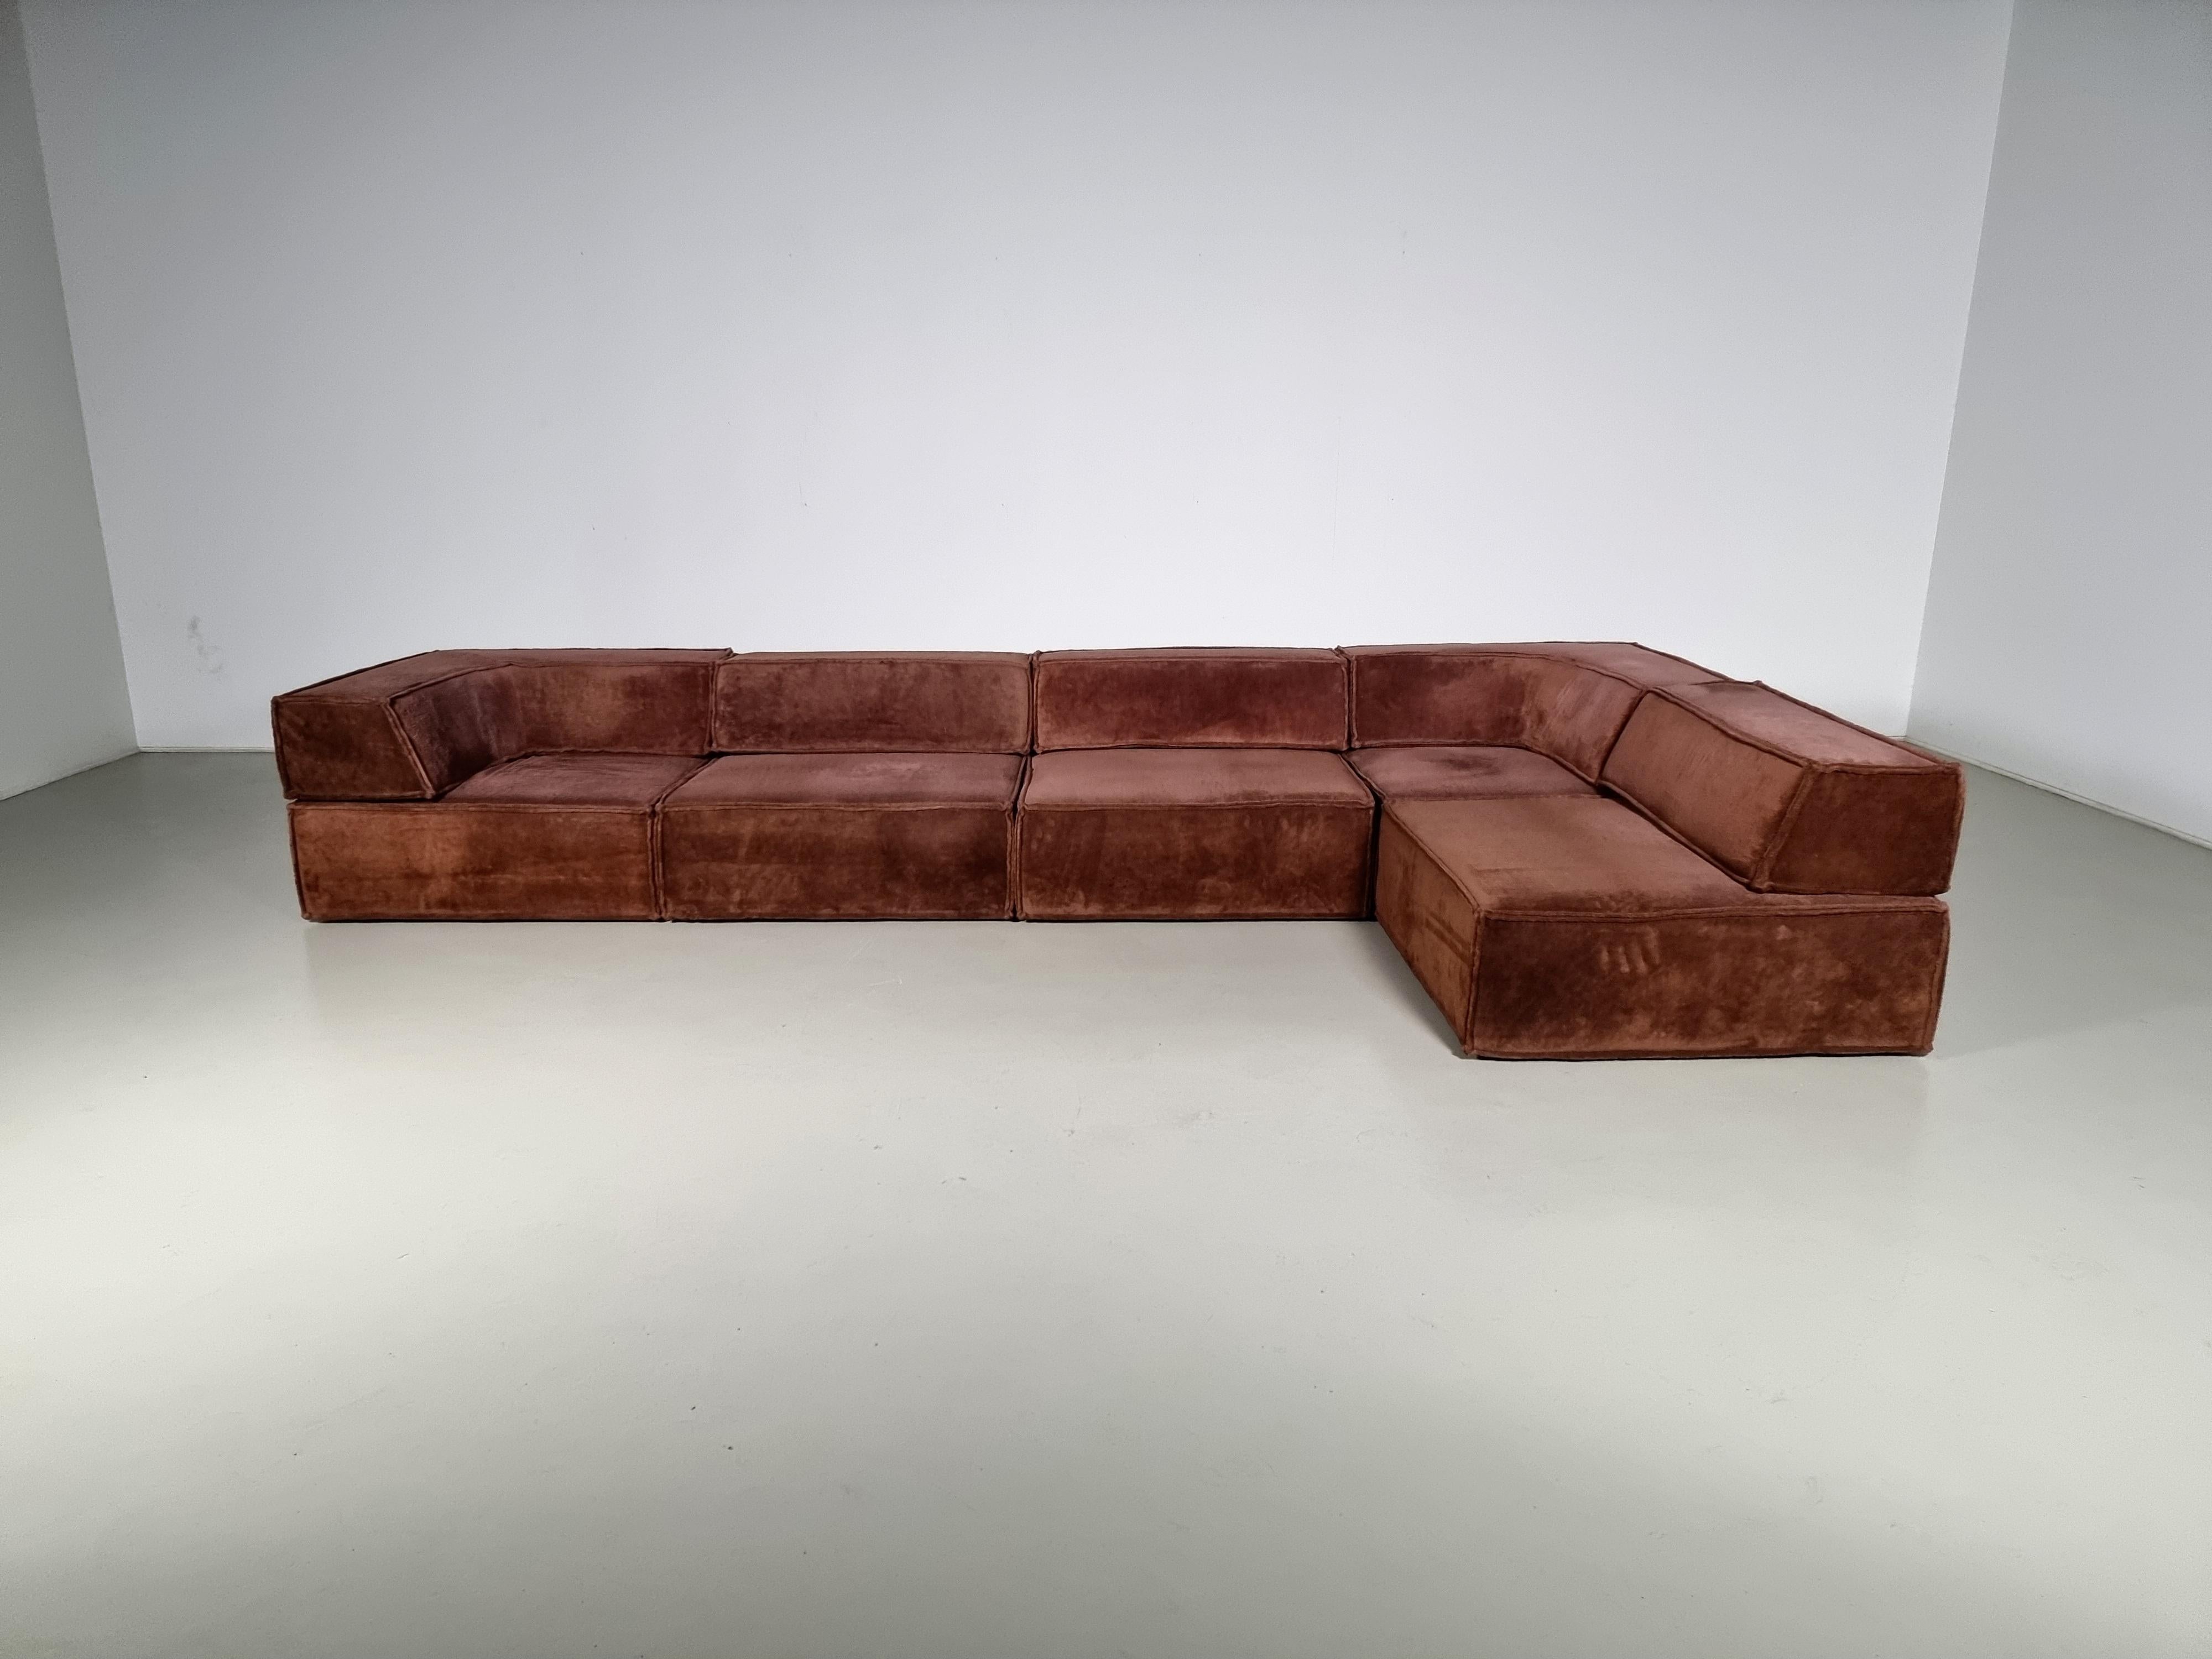 Very beautiful sofa landscape was designed by the Swiss Designers Group named Form AG and produced in the 1970s by COR, Germany. Many different kinds of variants are possible because of the modular and adjustable system of the sofa. In its original